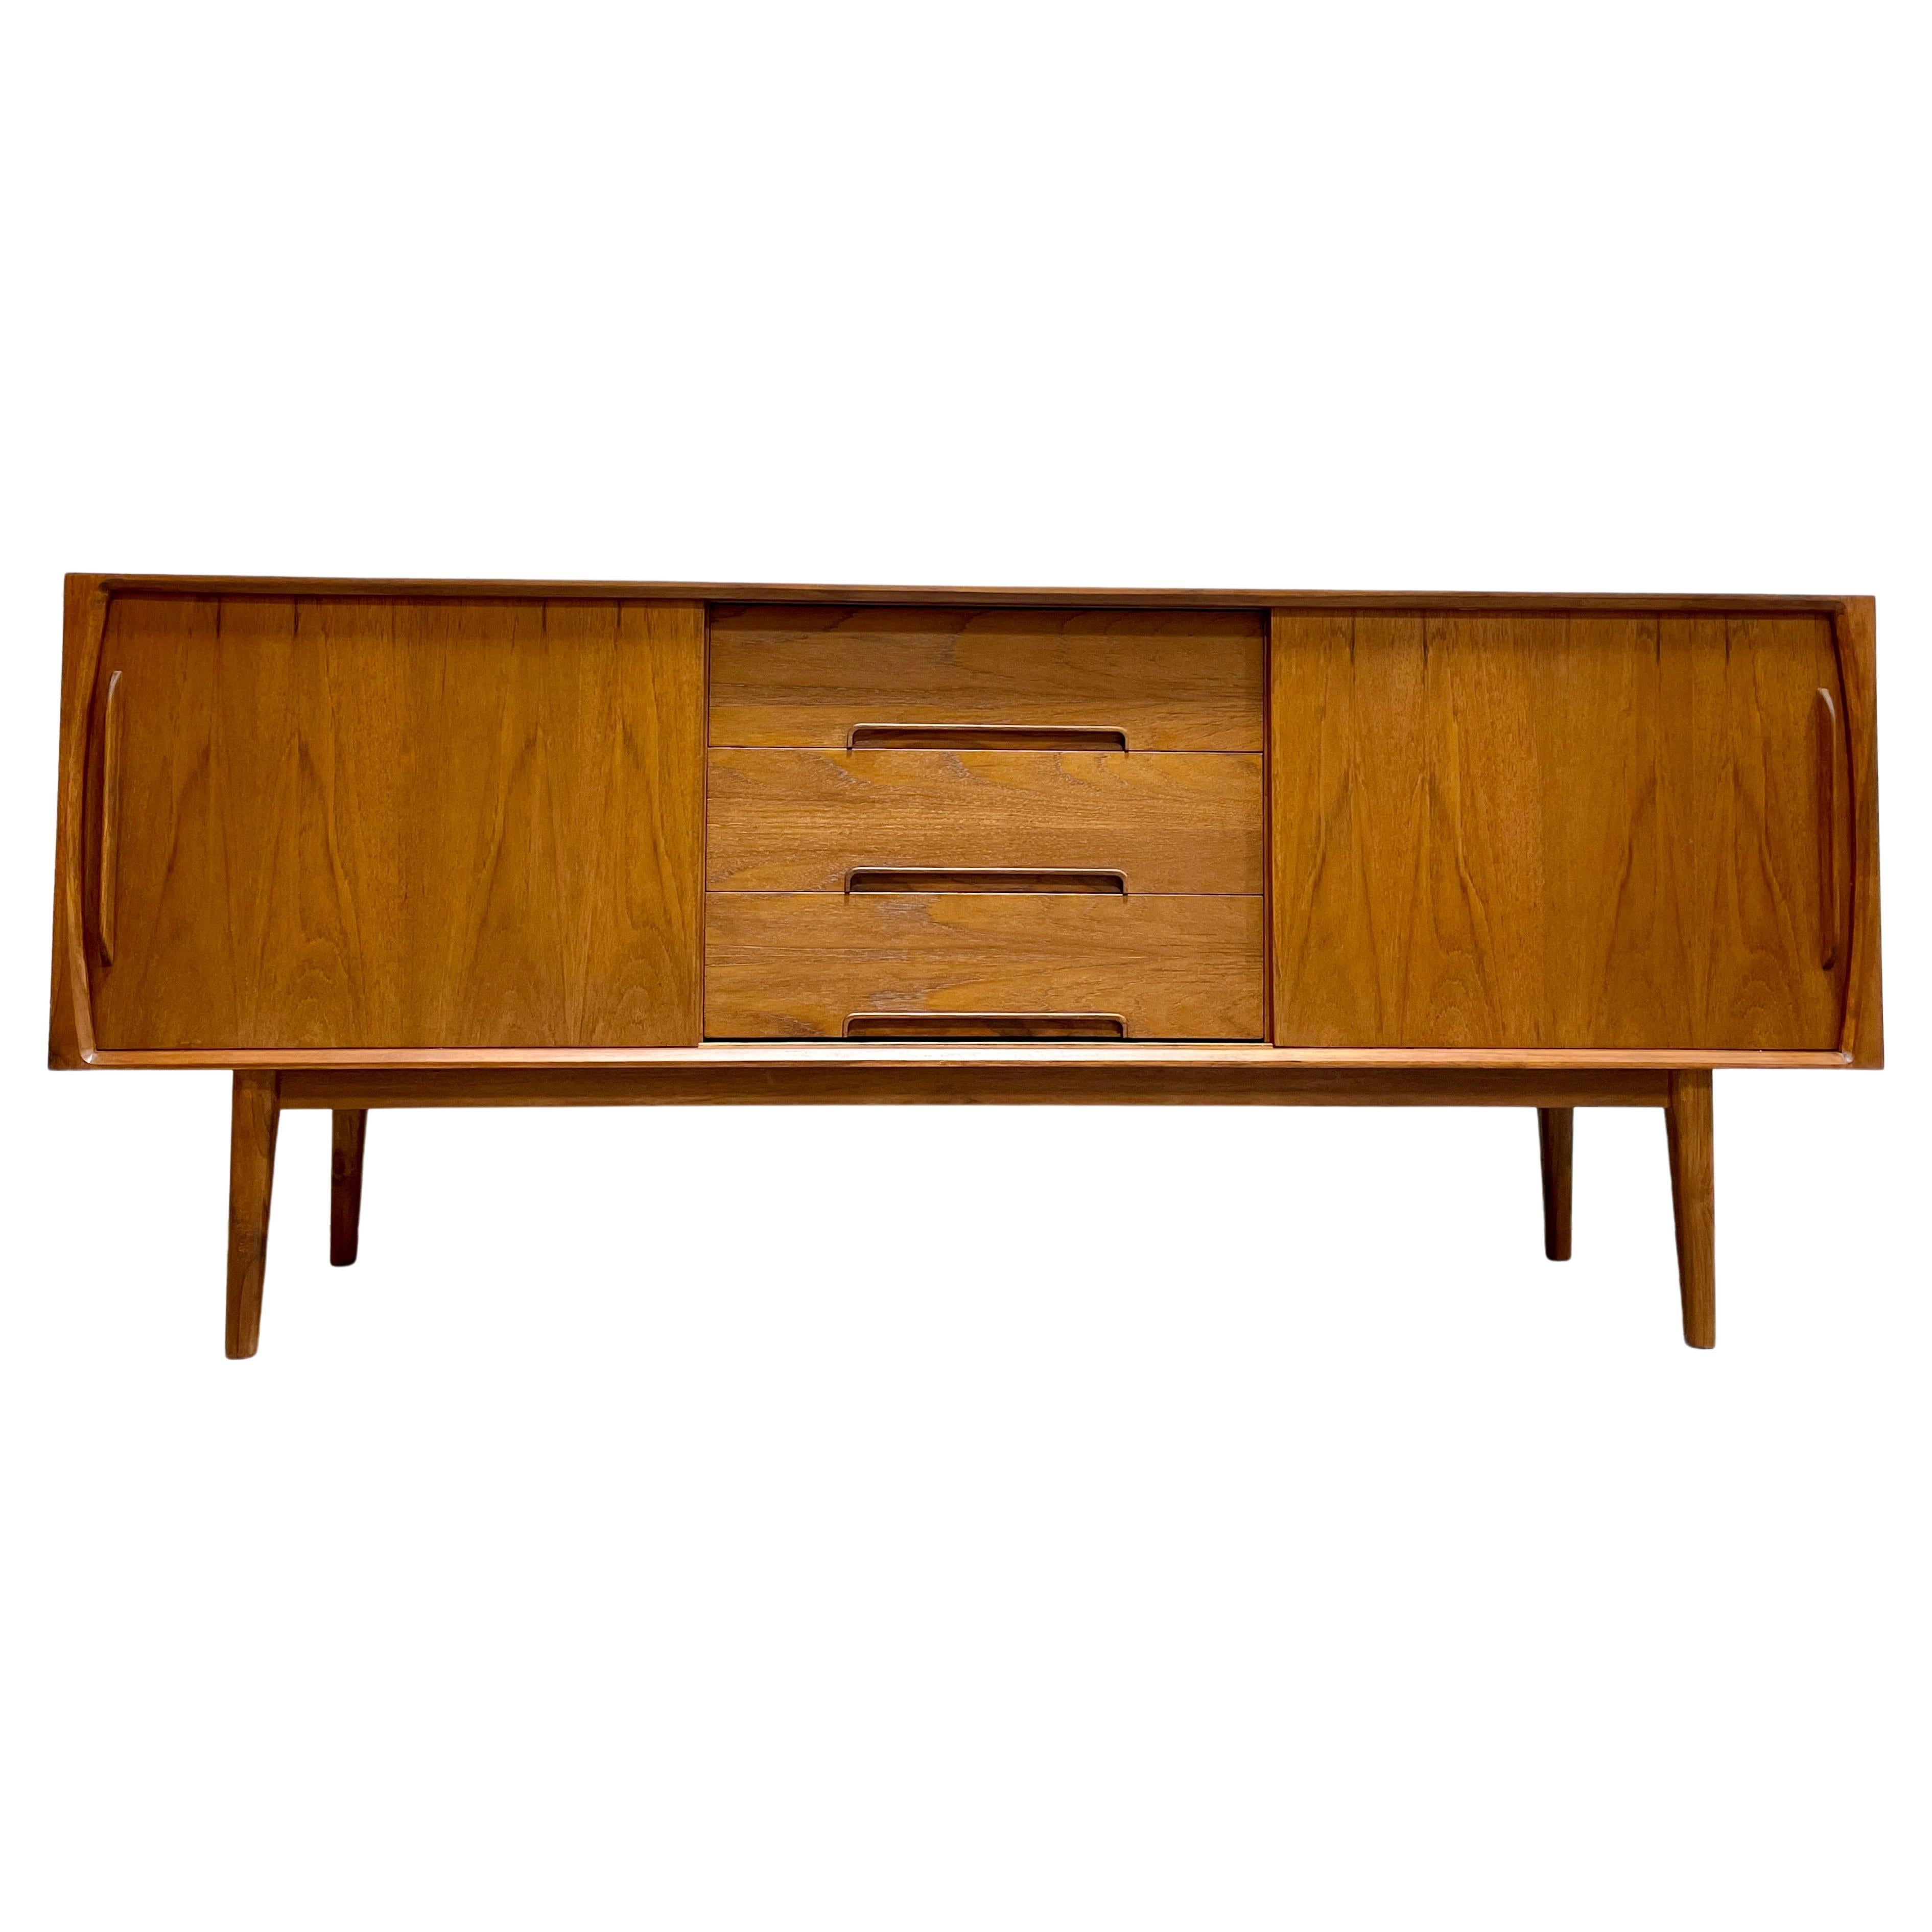 Impeccable Mid Century Modern styled Handmade Credenza featuring clean lines and gorgeous design detailing.  This credenza is highlighted by long tapered legs and intricately sculpted trim along the hand-pulls. The vast storage space offers three